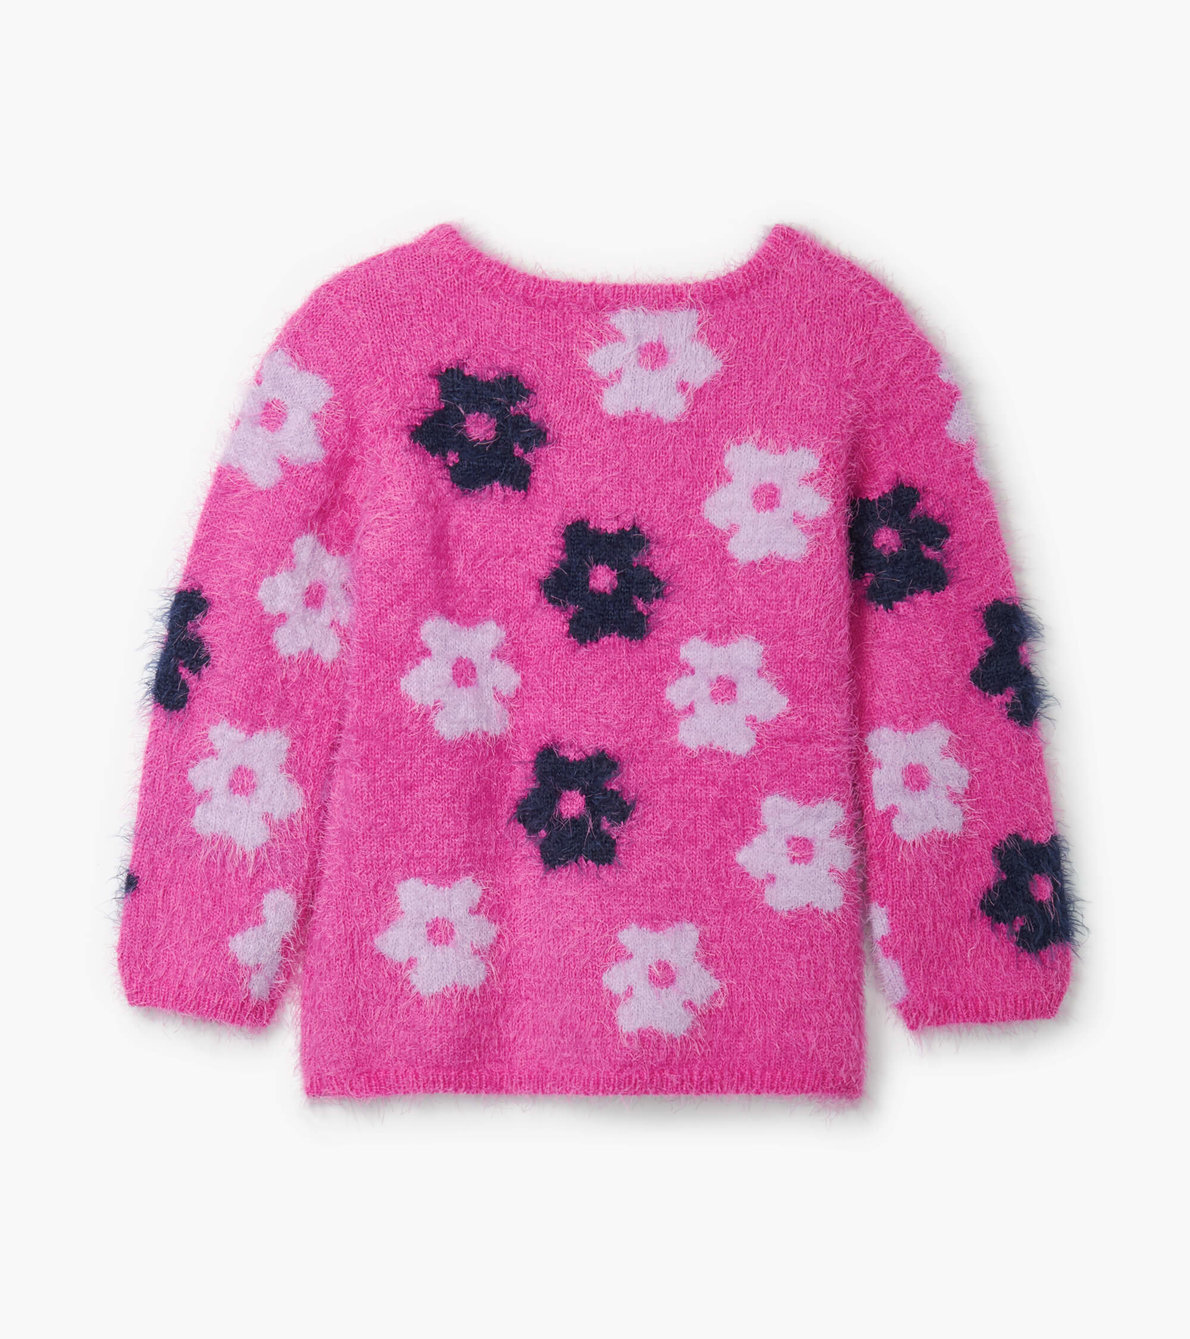 View larger image of Retro Flowers Fuzzy Sweater